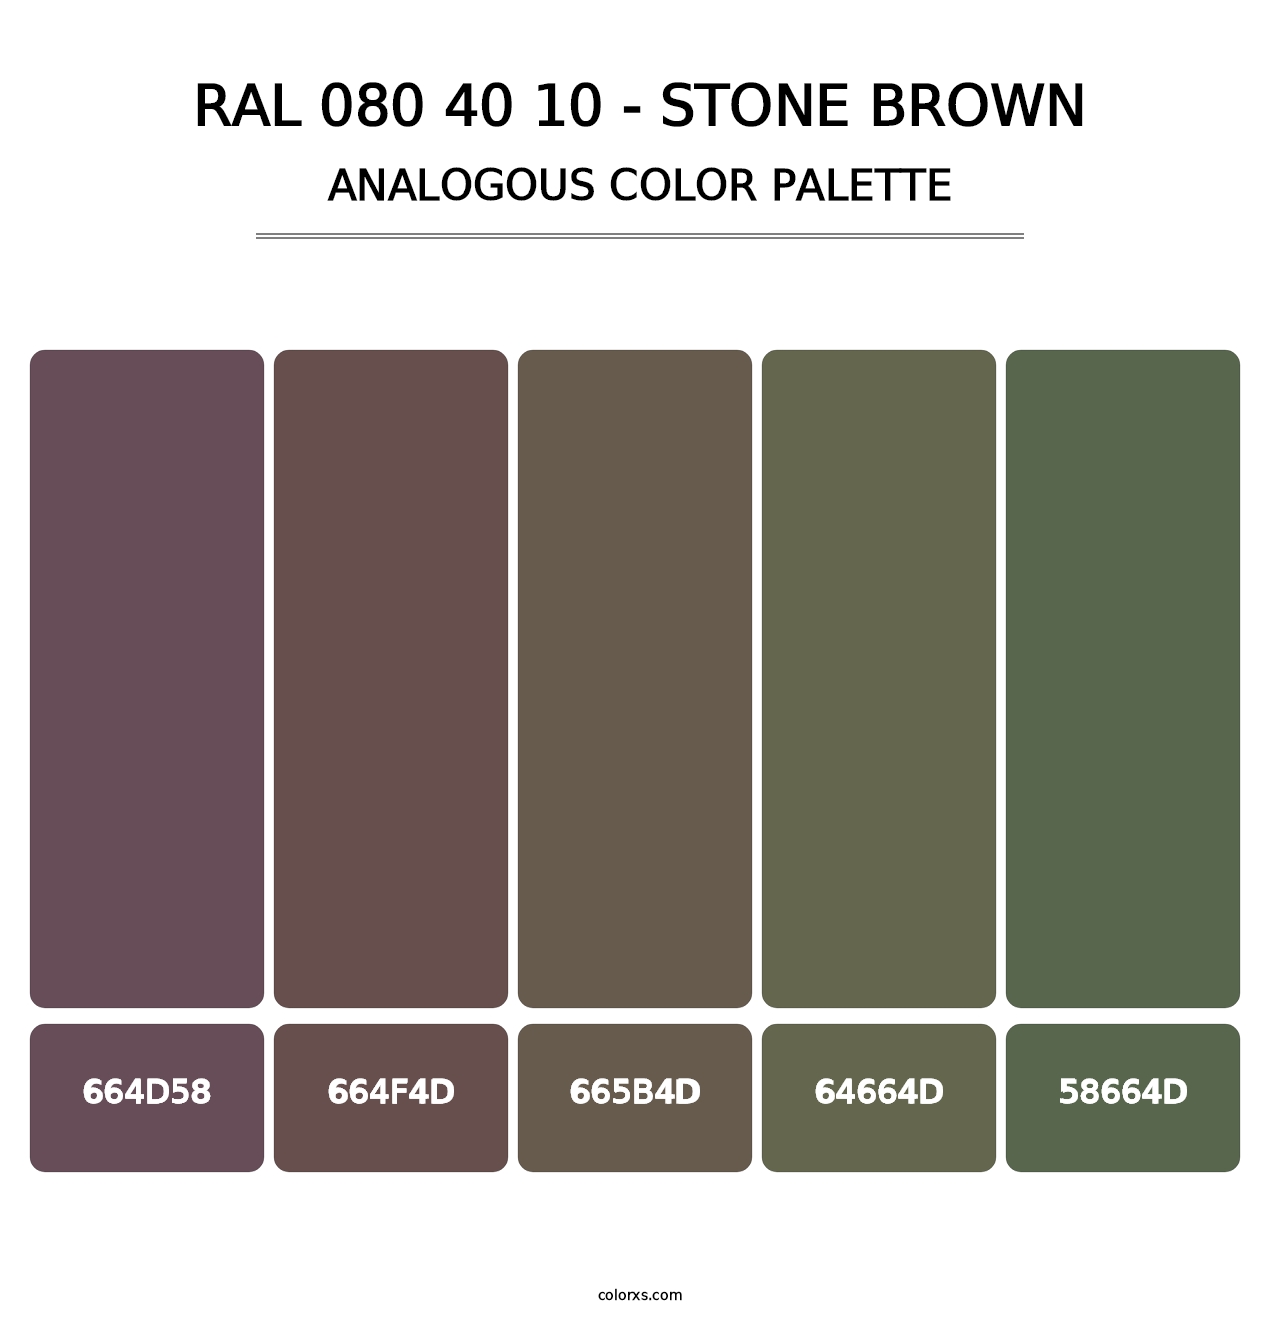 RAL 080 40 10 - Stone Brown - Analogous Color Palette